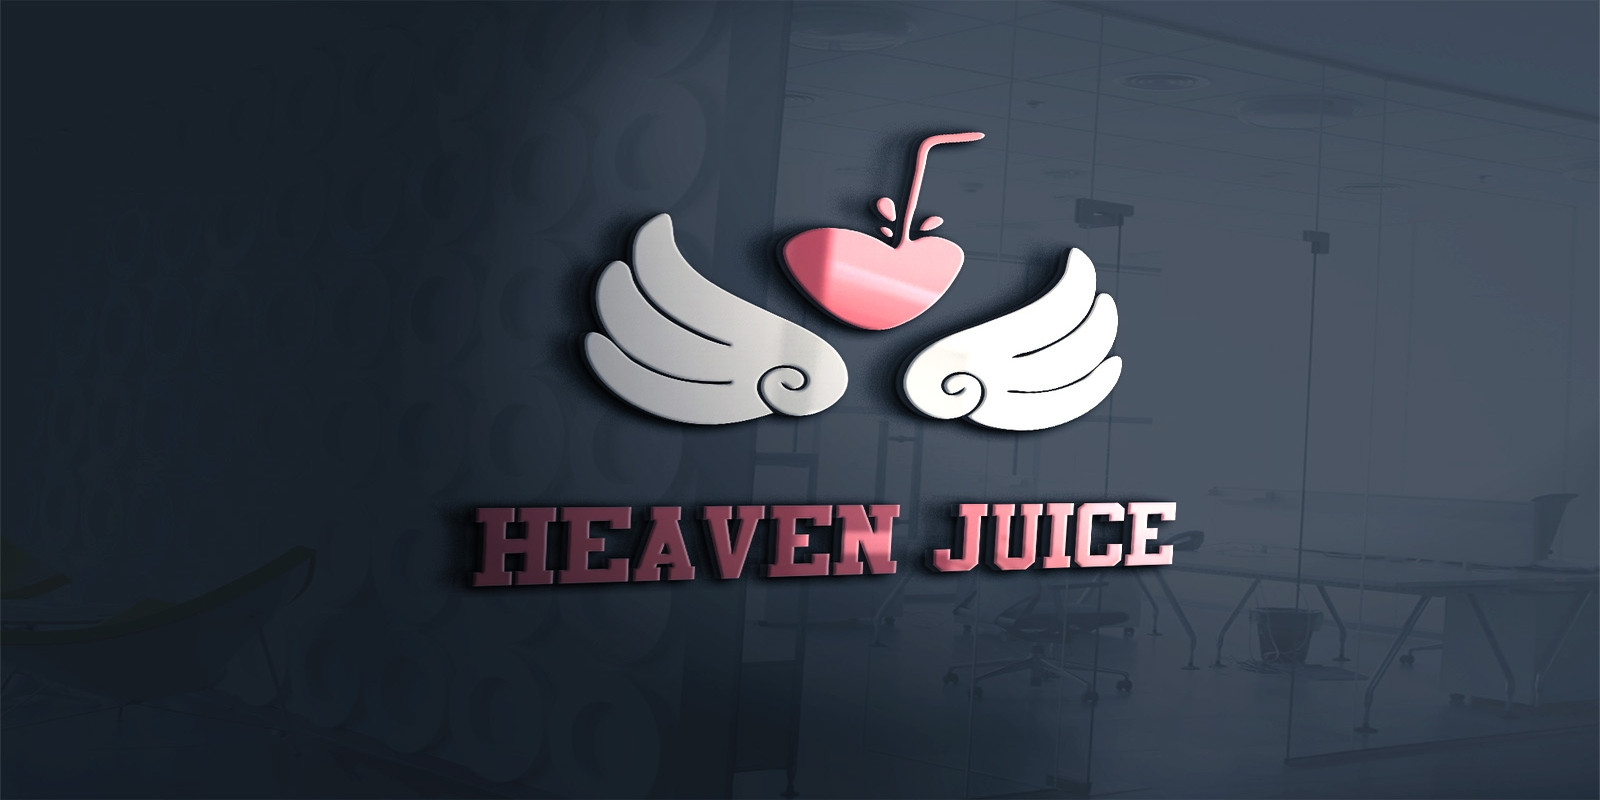 Download 7th Heaven - Logo Heaven PNG Image with No Background - PNGkey.com